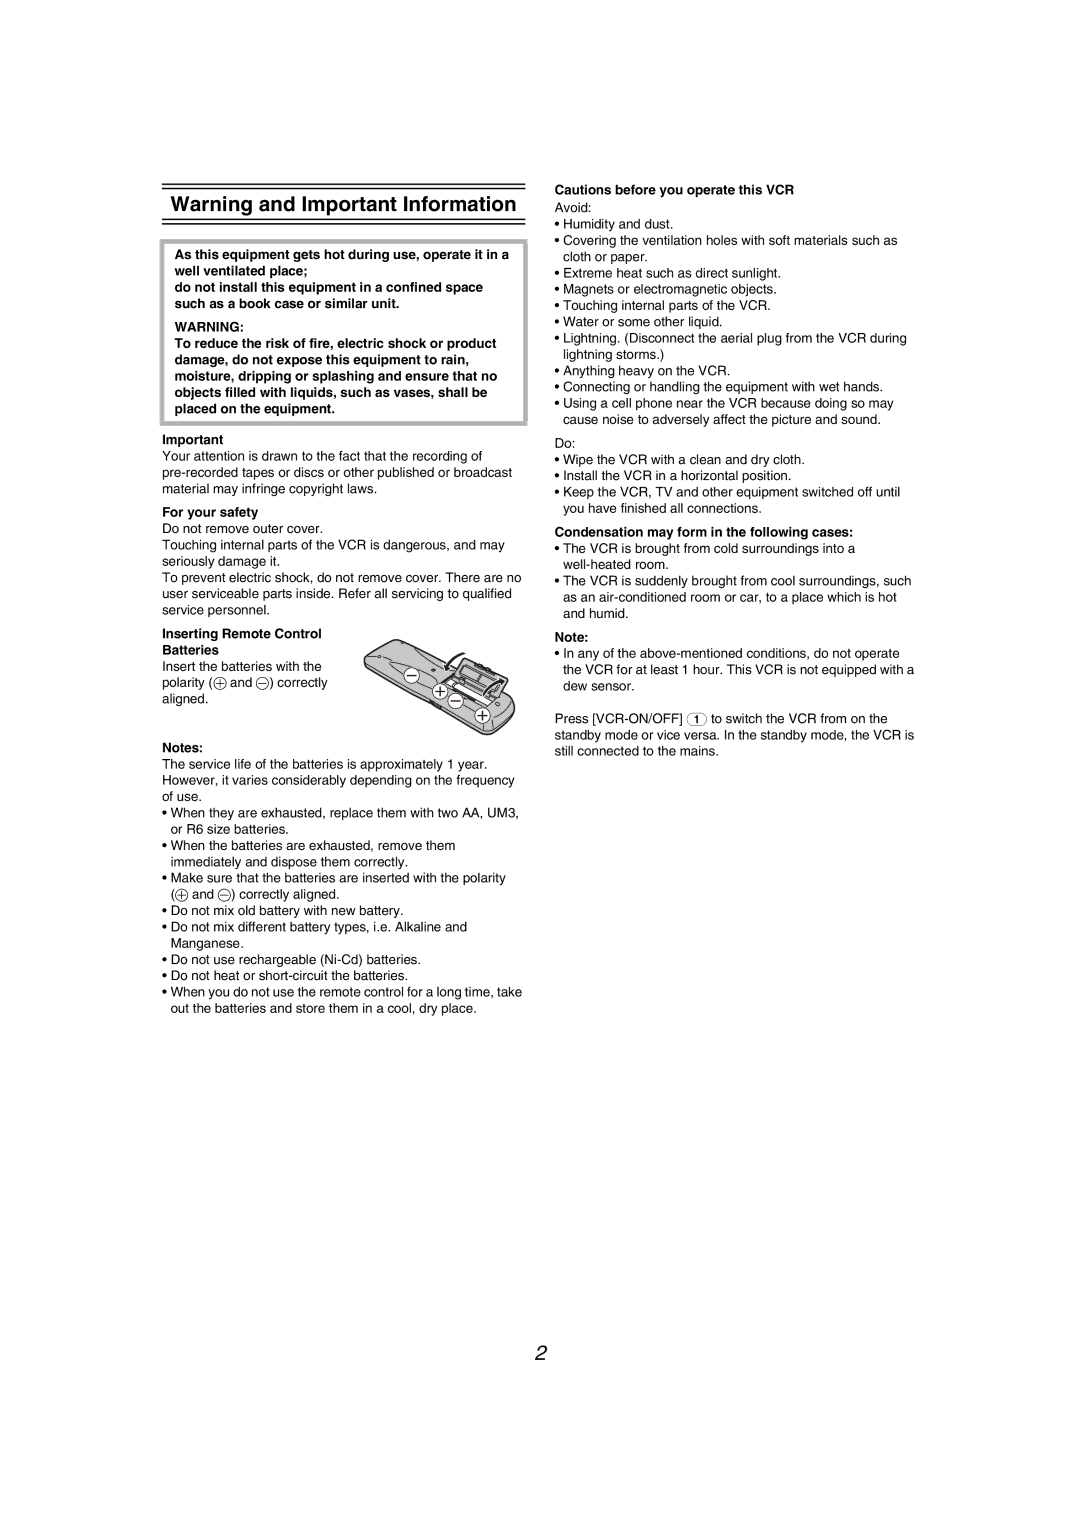 Panasonic NV-MV40GL For your safety, Inserting Remote Control Batteries, Condensation may form in the following cases 